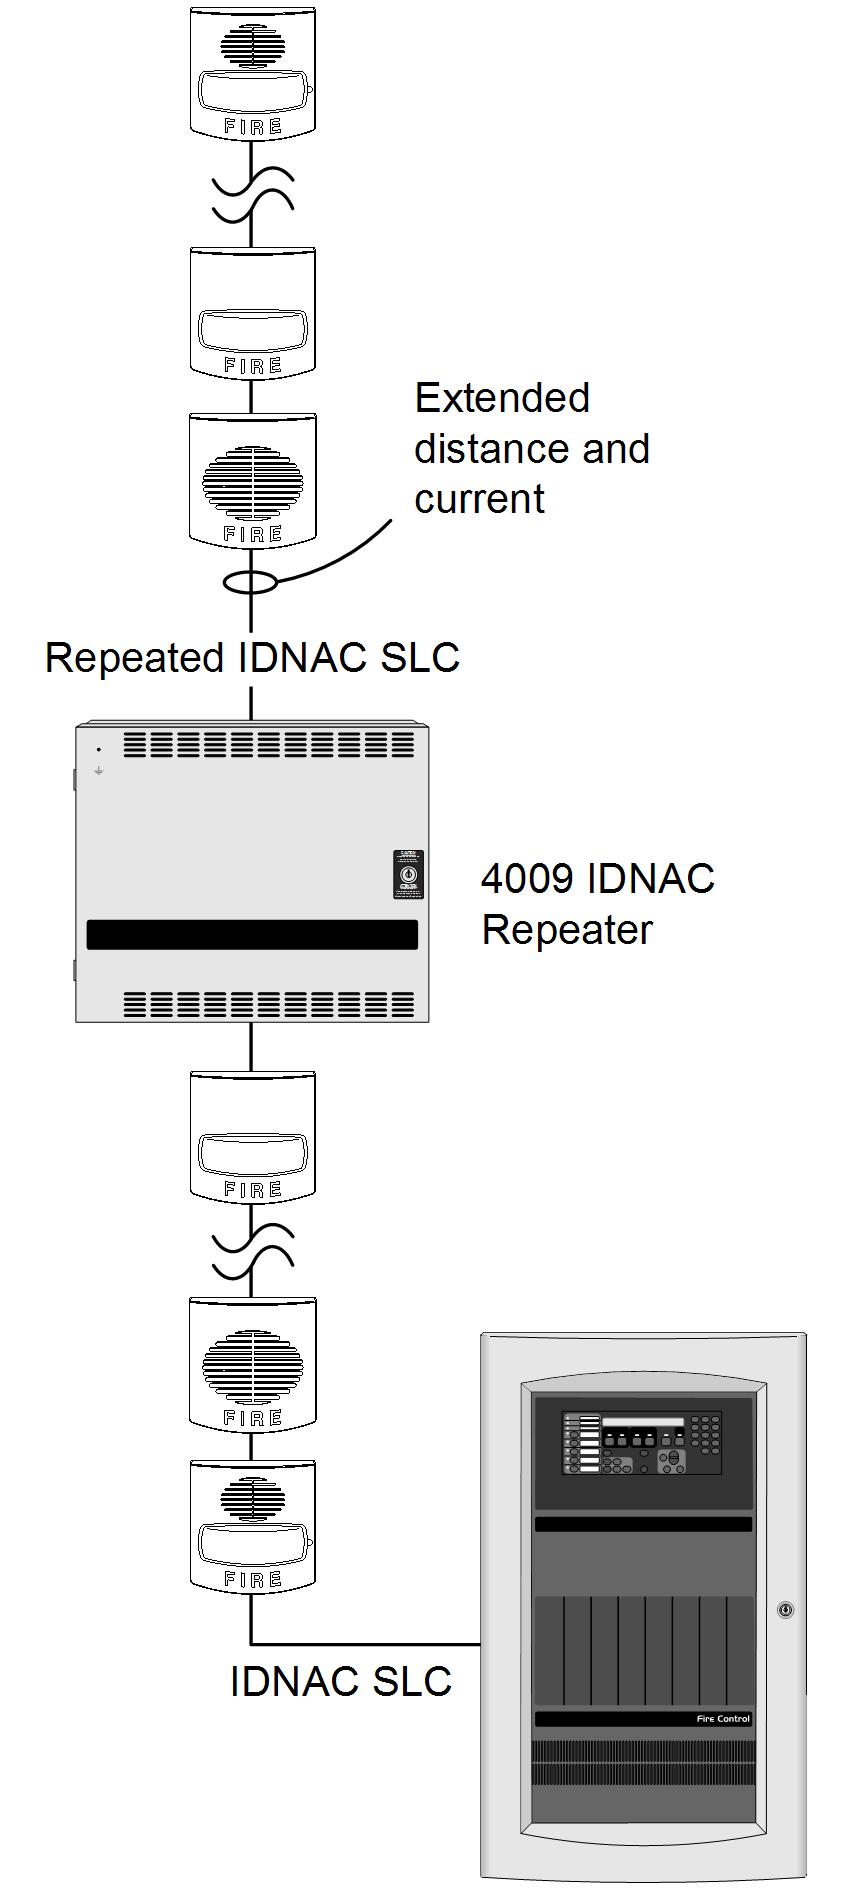 UL, ULC Approved* TrueAlert Addressable Notification 4009 IDNAC Repeater; Power and Distance Extender Features IDNAC Repeaters provide enhanced power delivery to TrueAlert/ TrueAlert ES addressable